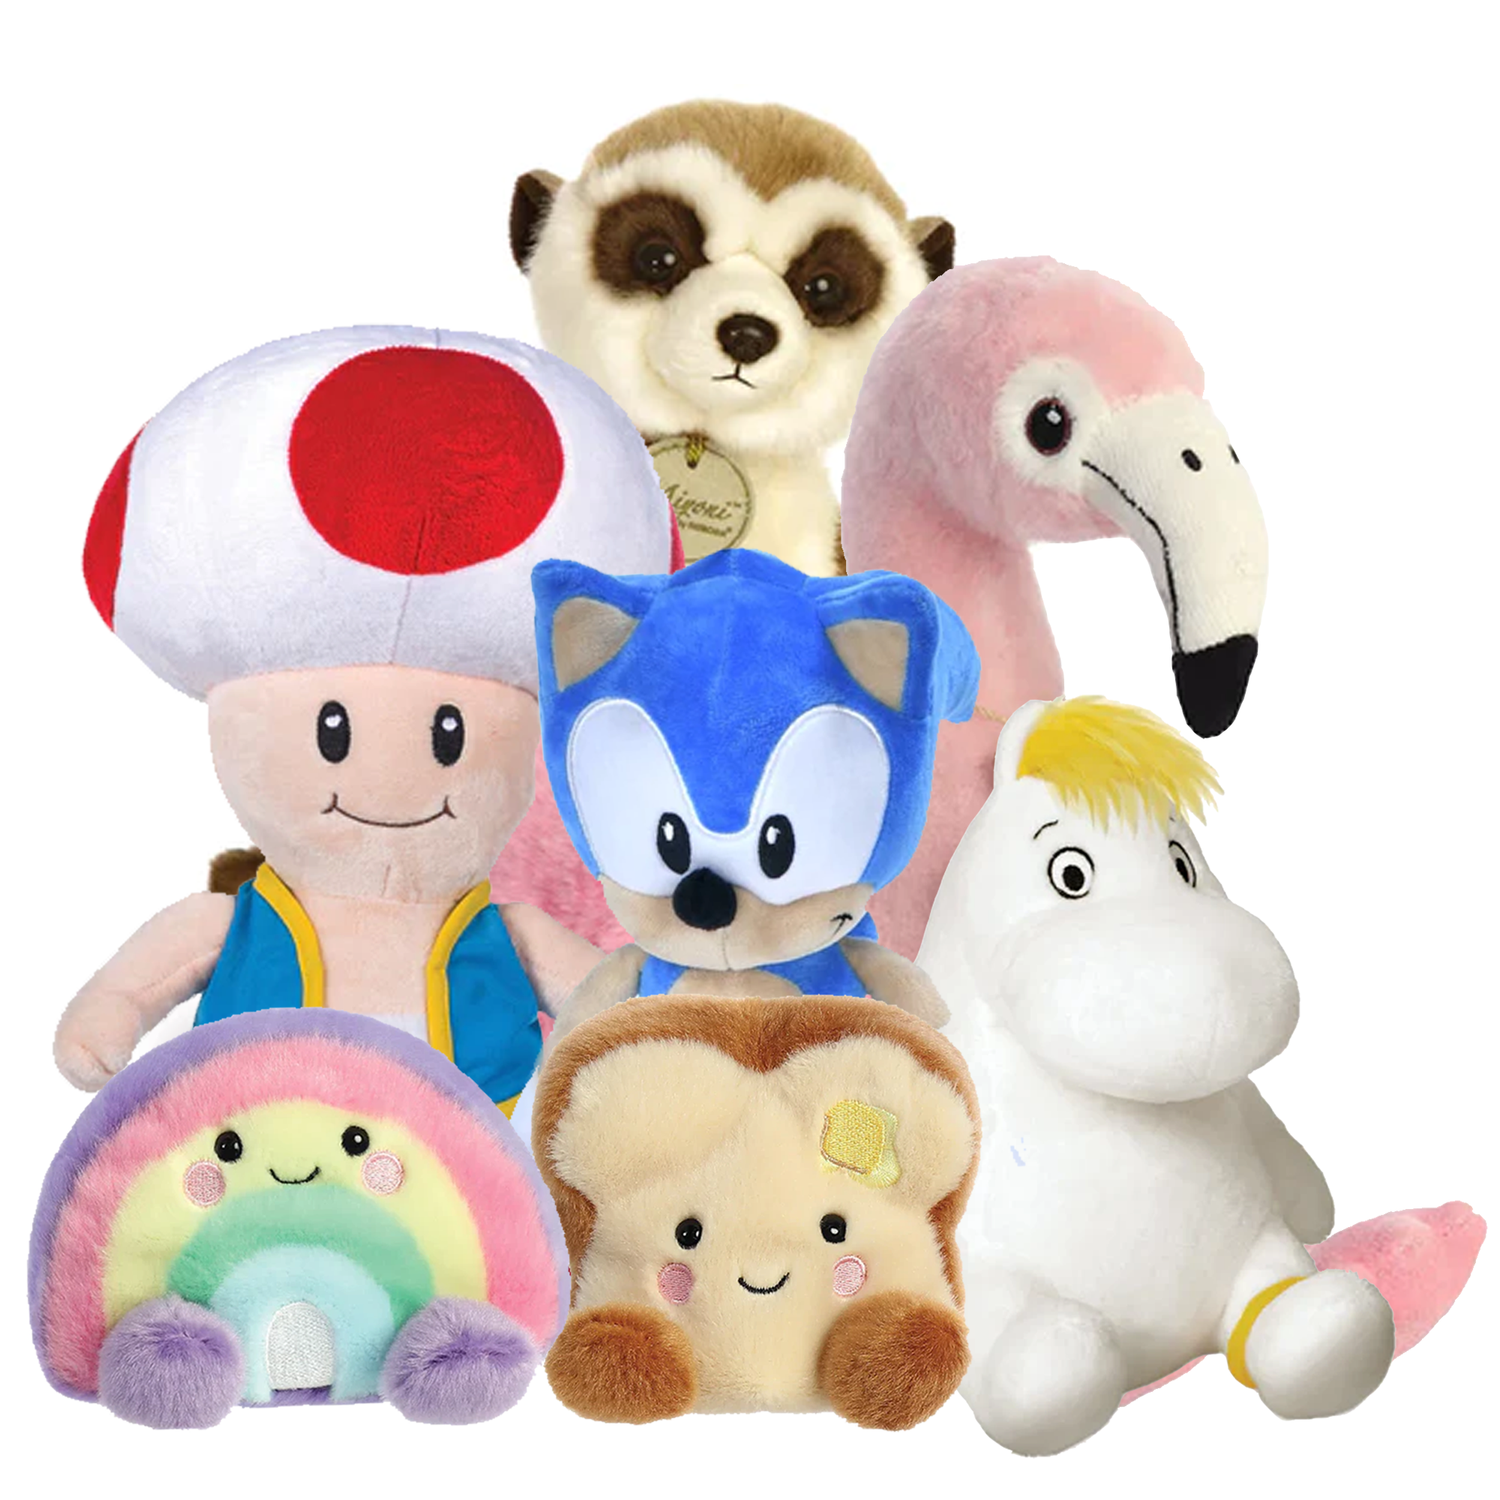 A Collection of Plushies & Soft Toys at Happy Piranha